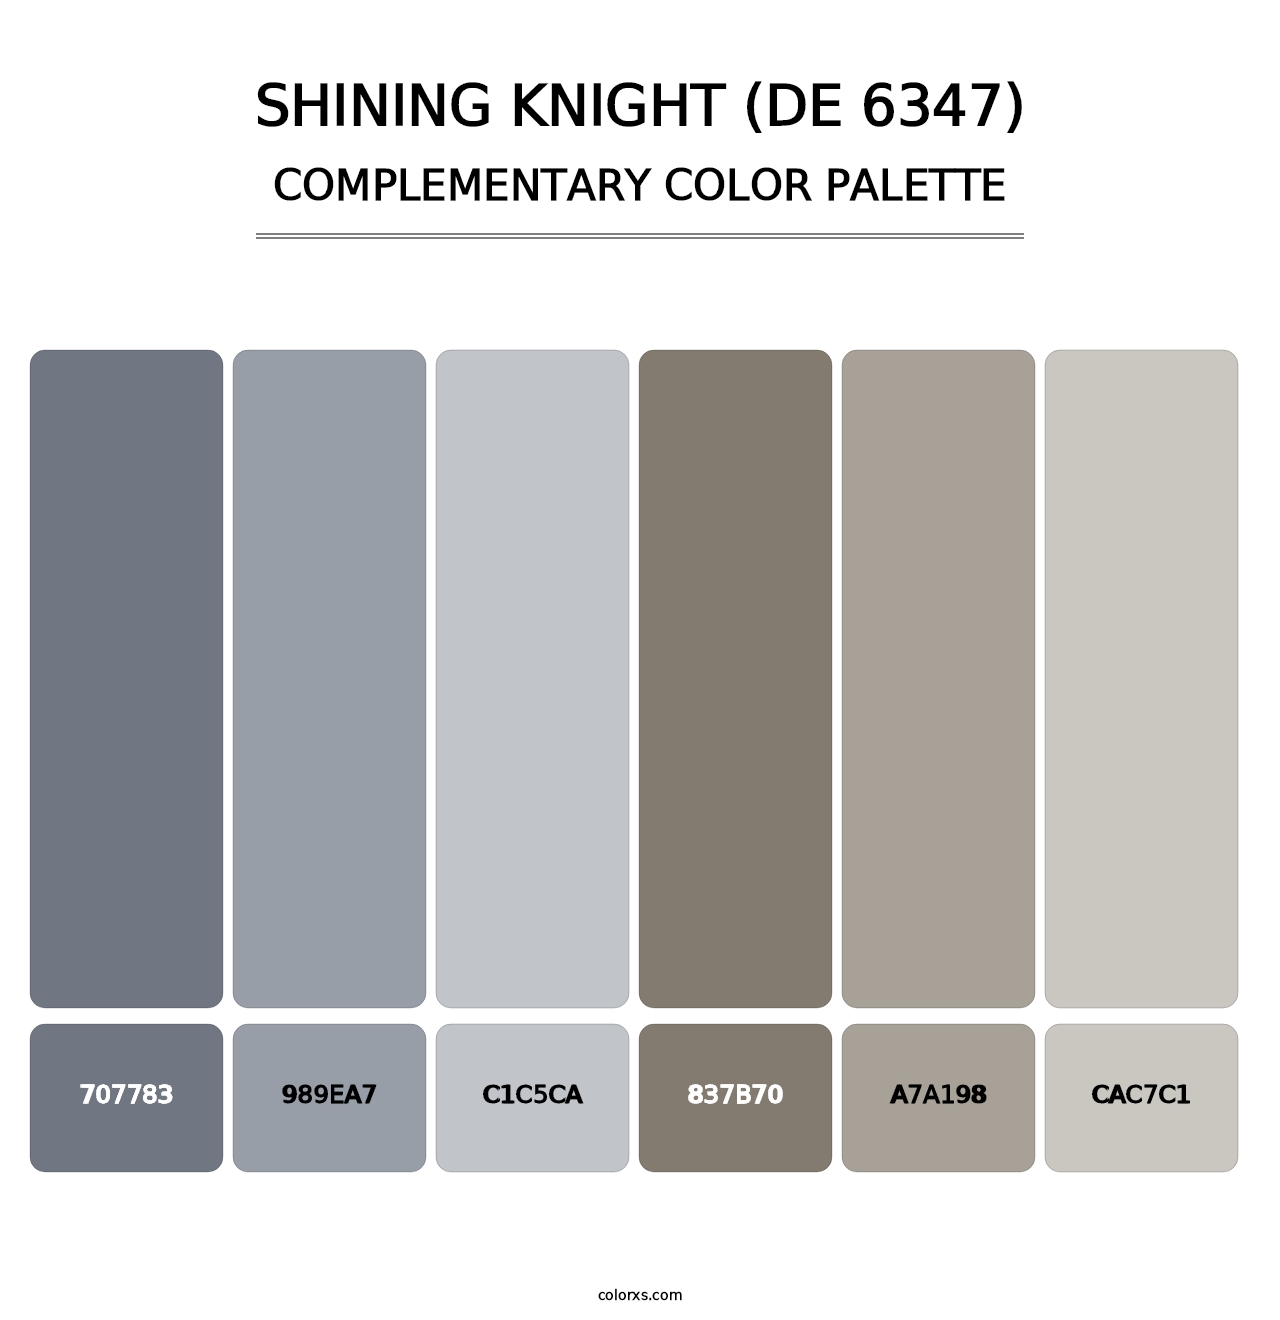 Shining Knight (DE 6347) - Complementary Color Palette